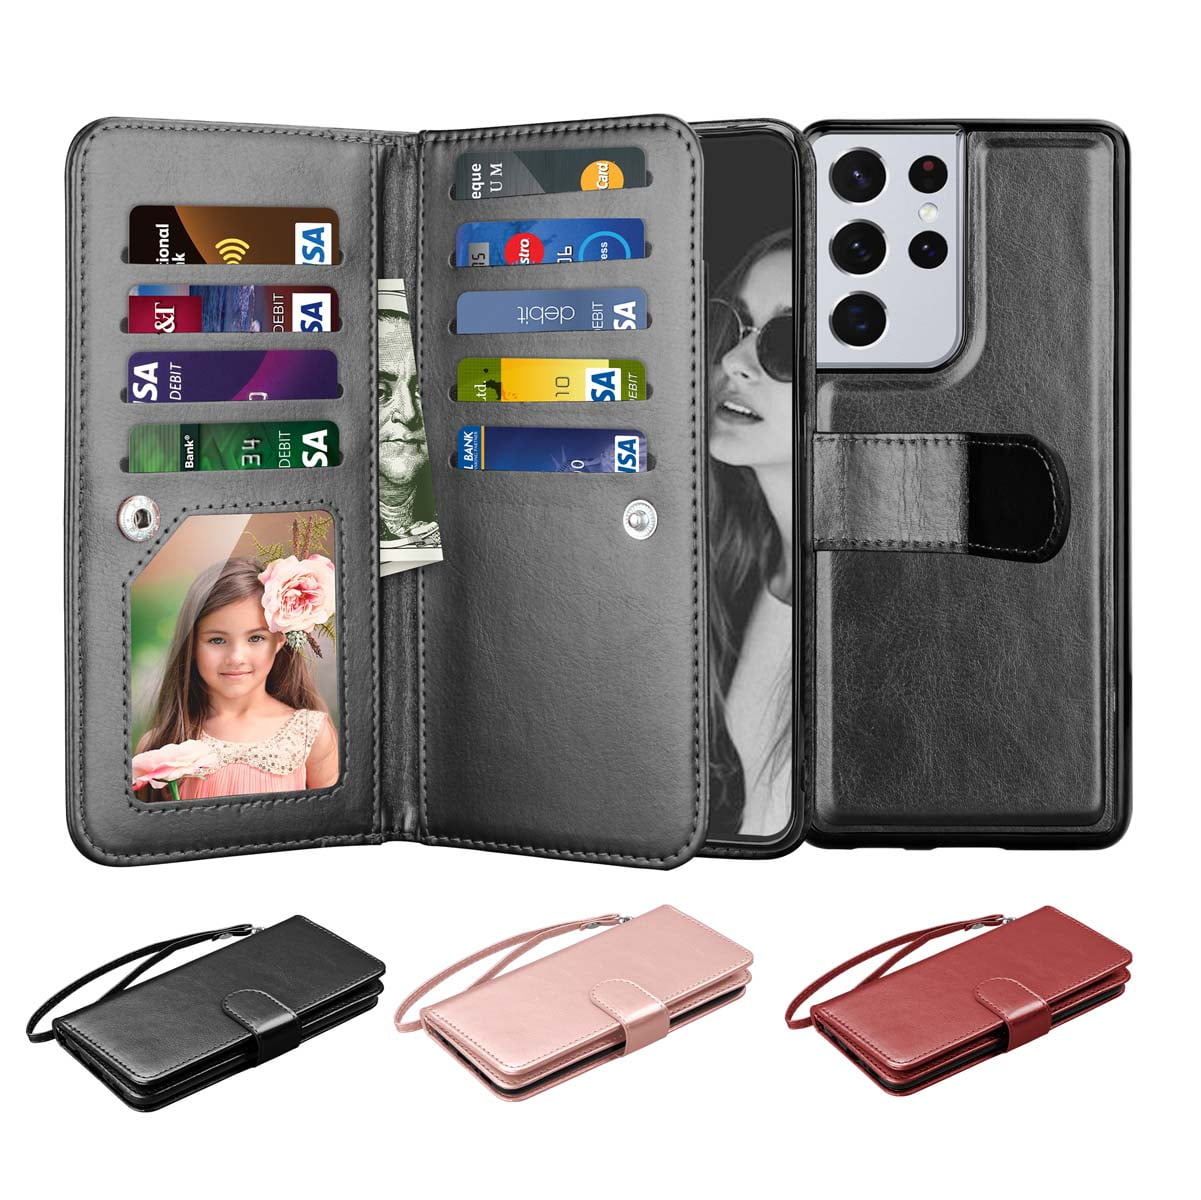 Samsung Galaxy S10 Flip Case Cover for Leather Kickstand Wallet case Luxury Business Card Holders Flip Cover 